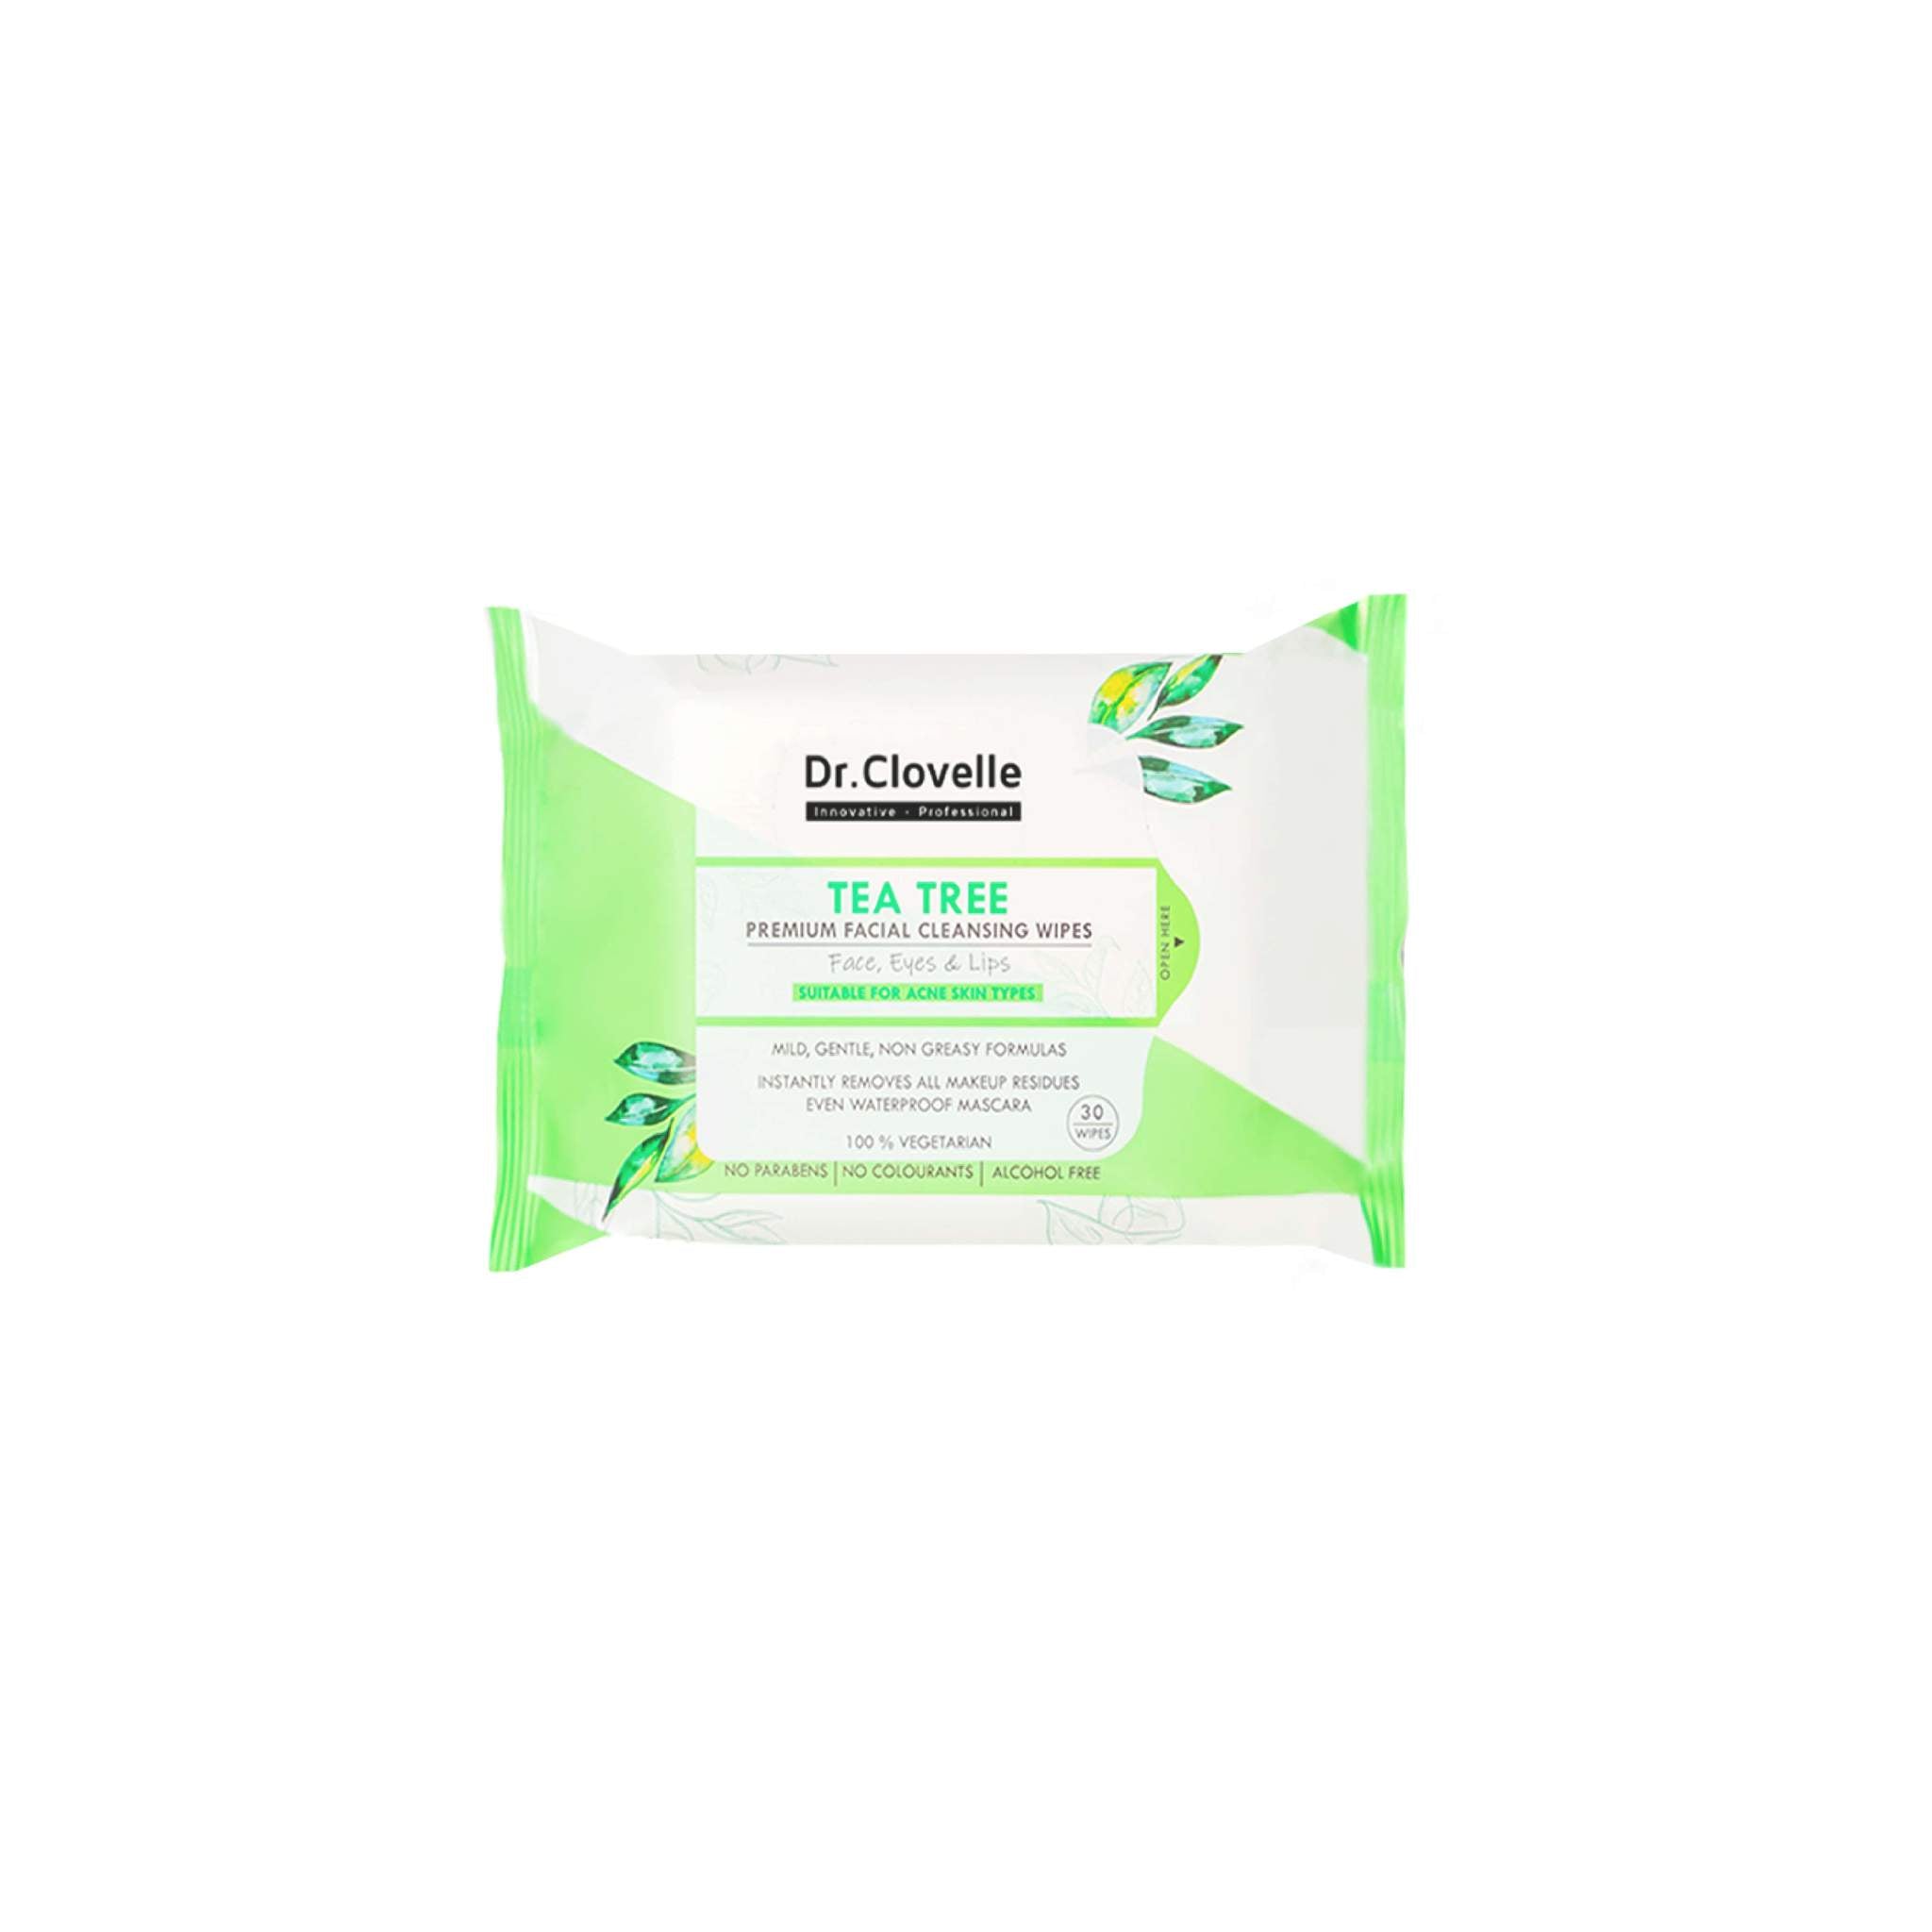 Dr.Clovelle Premium Facial Cleansing Wipes (Tea Tree) 30s - DoctorOnCall Online Pharmacy